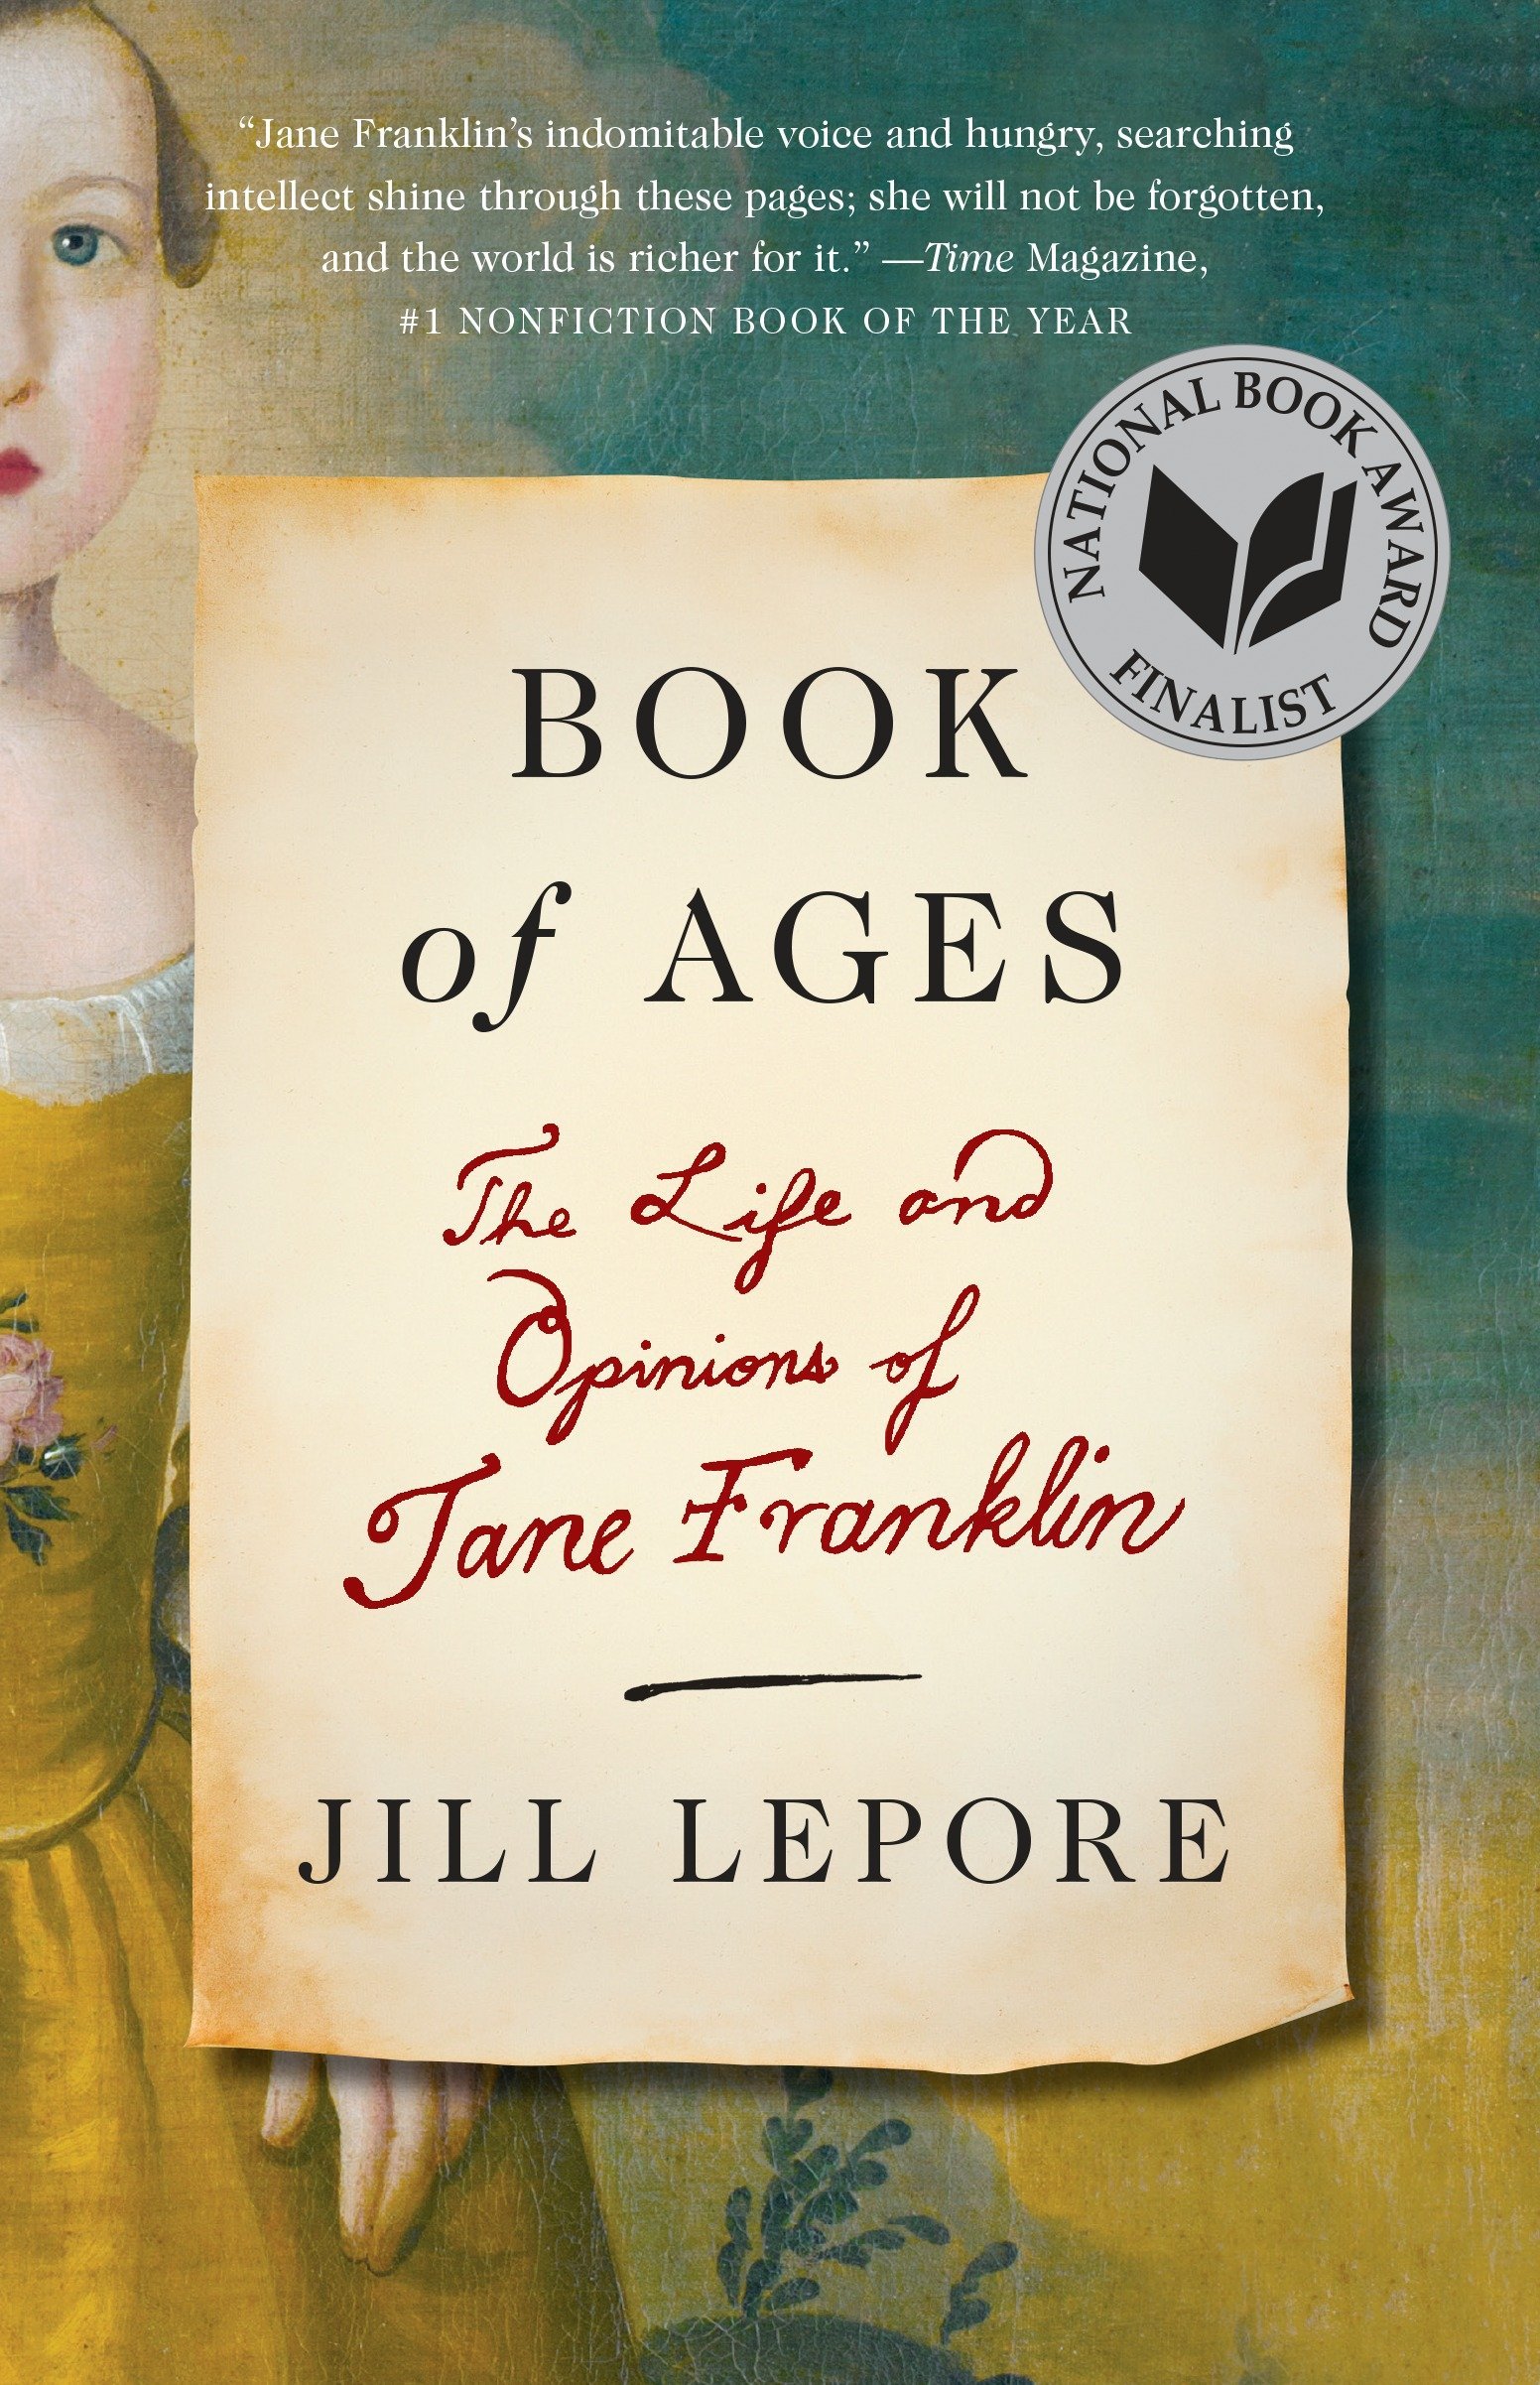 Book of Ages lepore